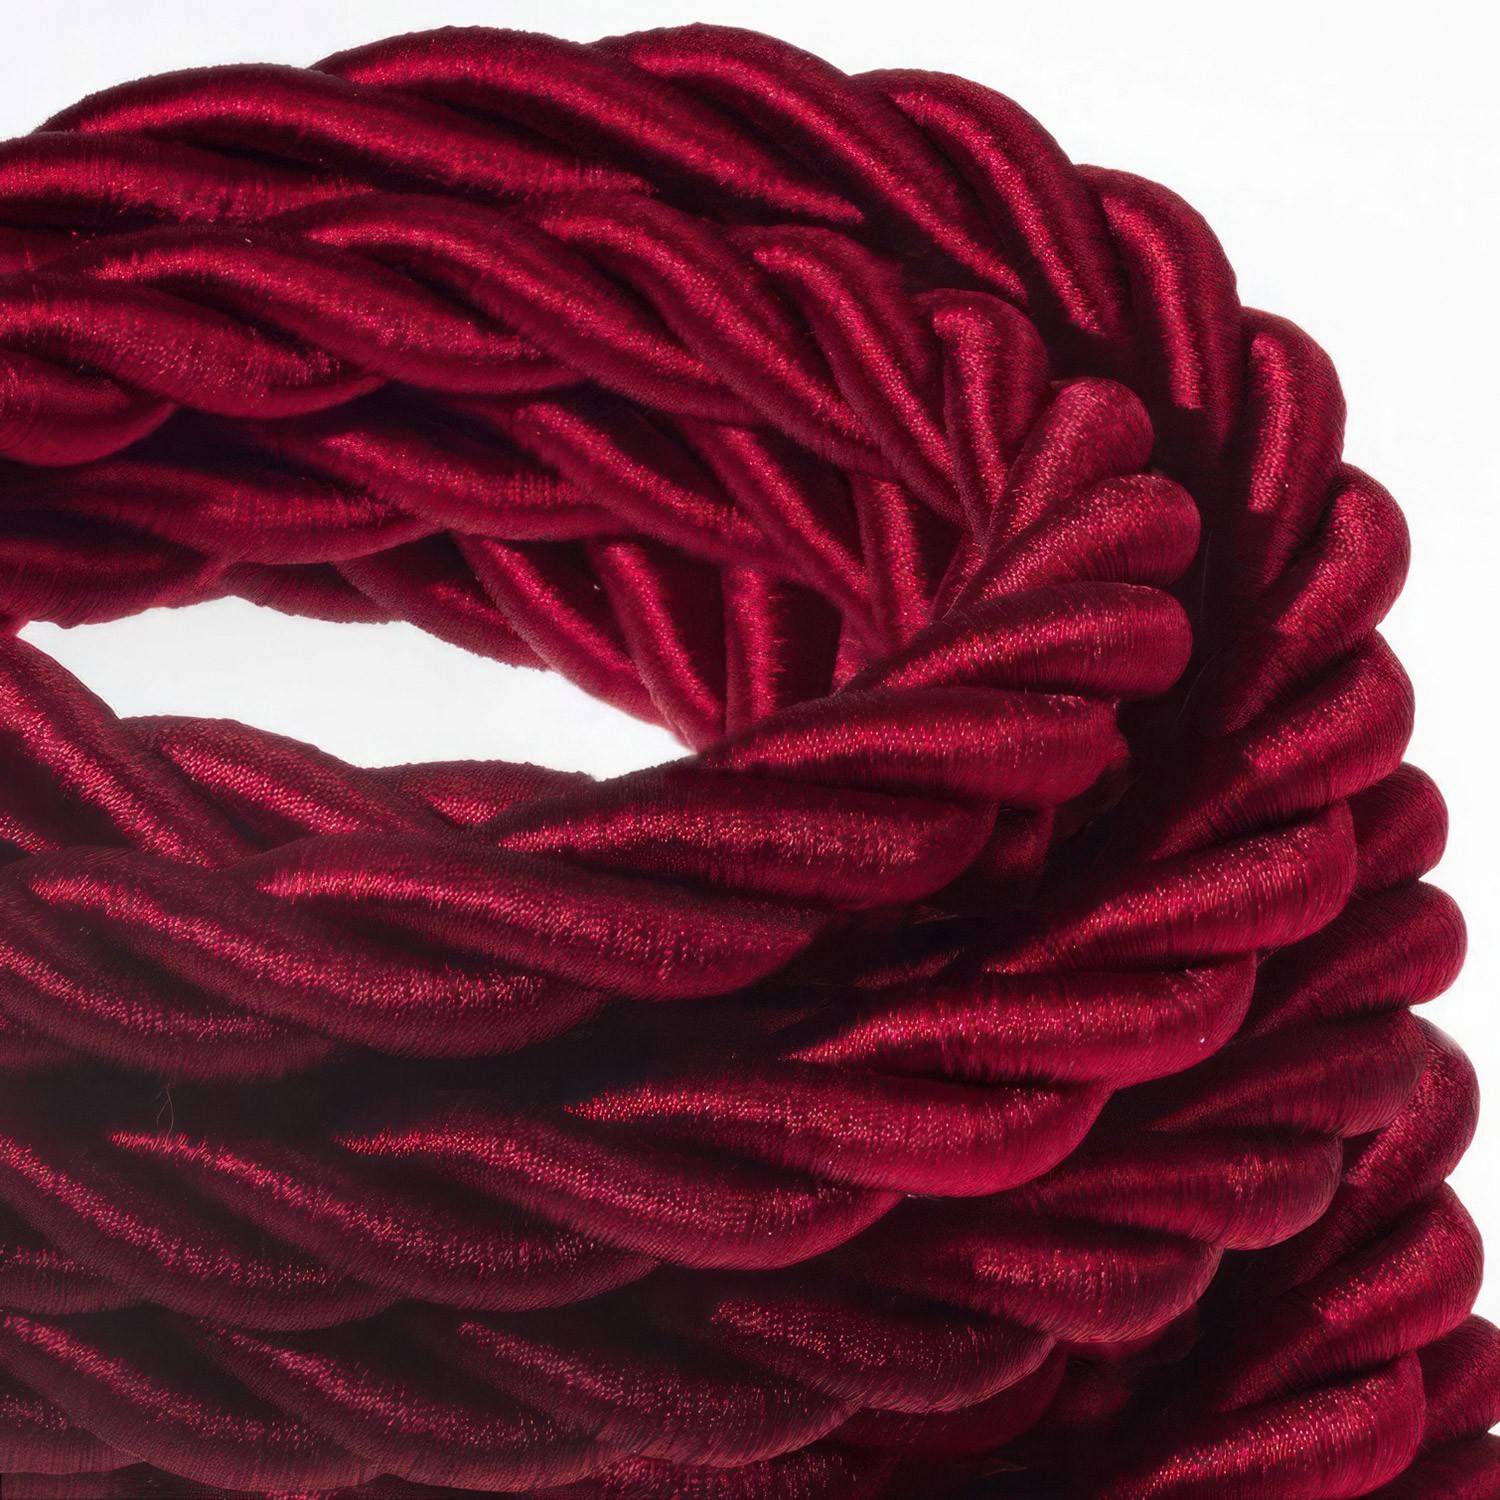 2XL electrical cord, electrical cable 3x0,75. Shiny dark bordeaux fabric covering. Diameter 24mm.